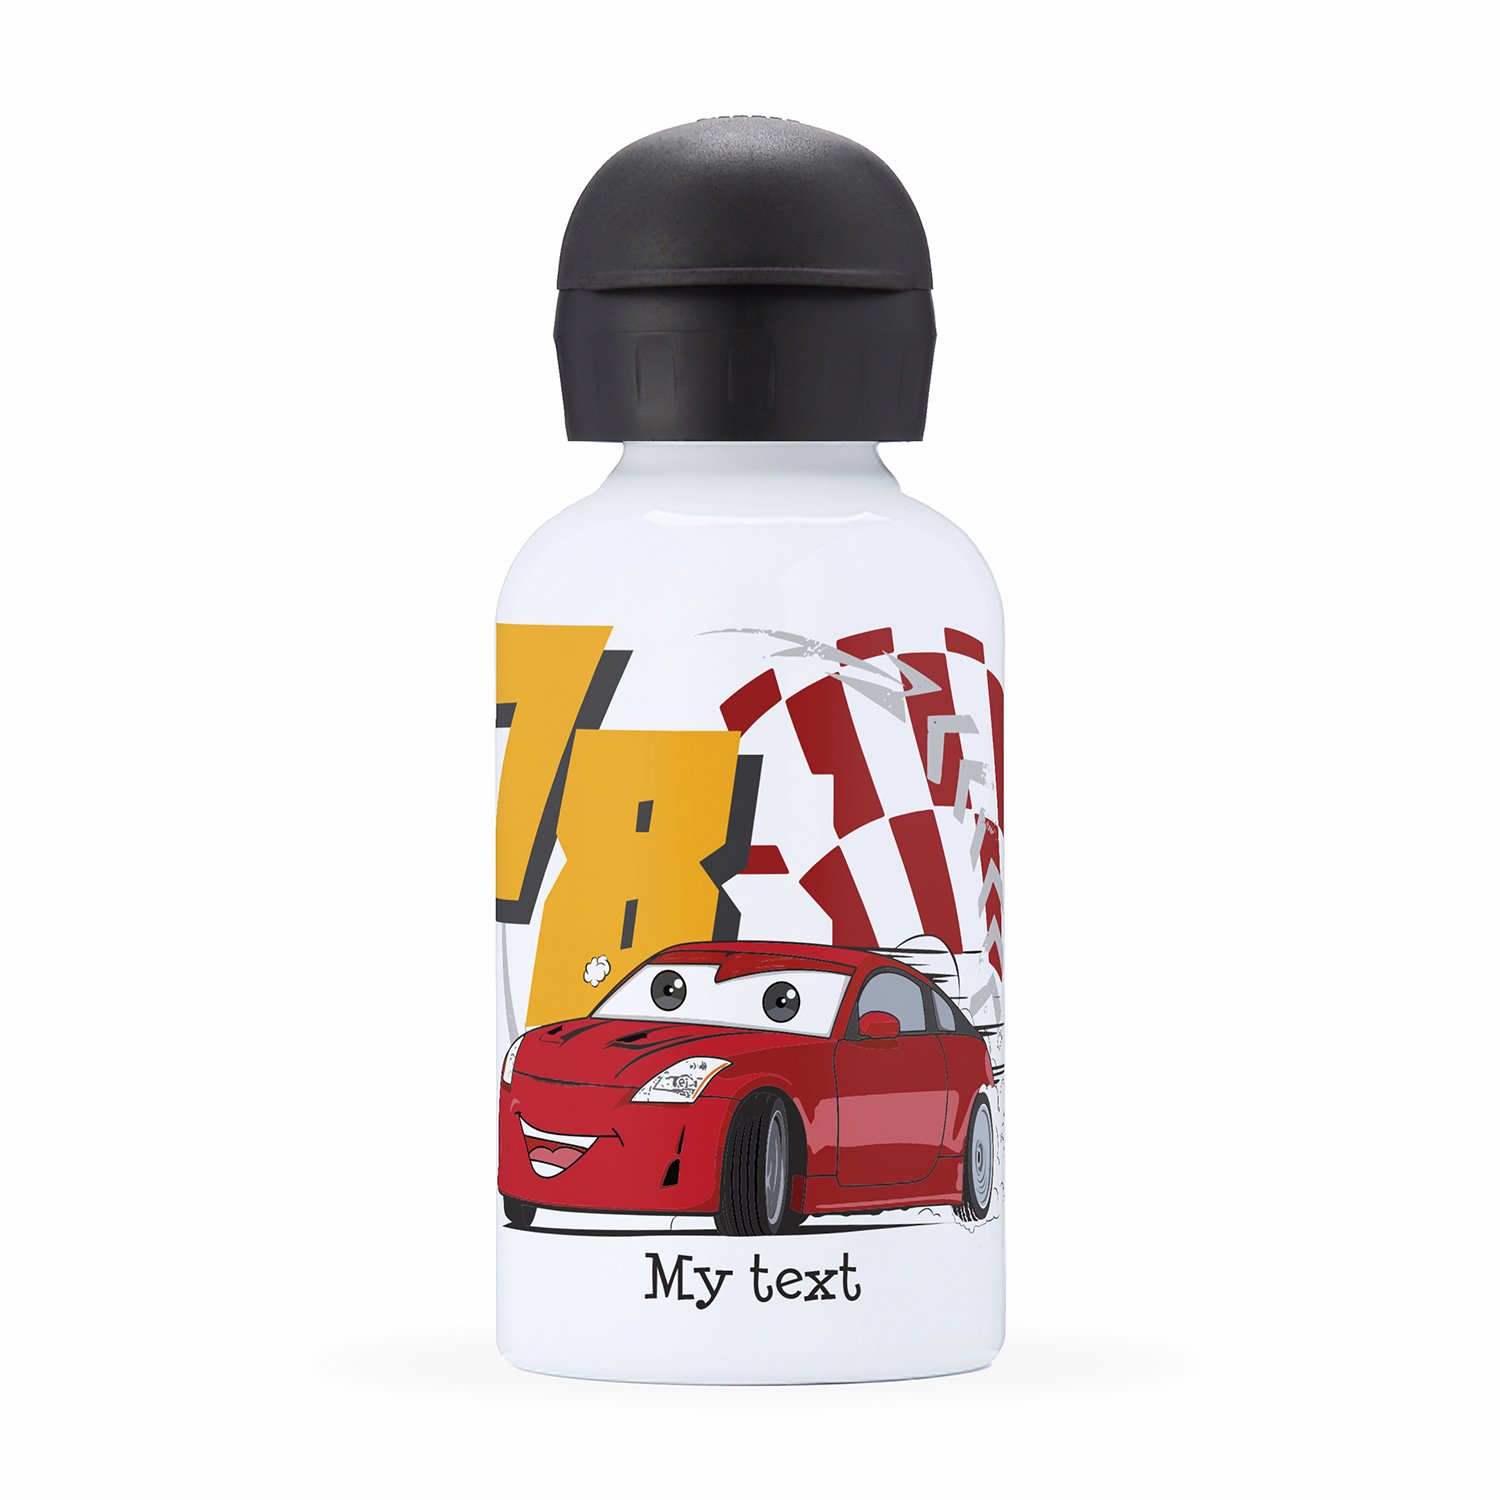 Children's personalized insulated water bottle - Race car